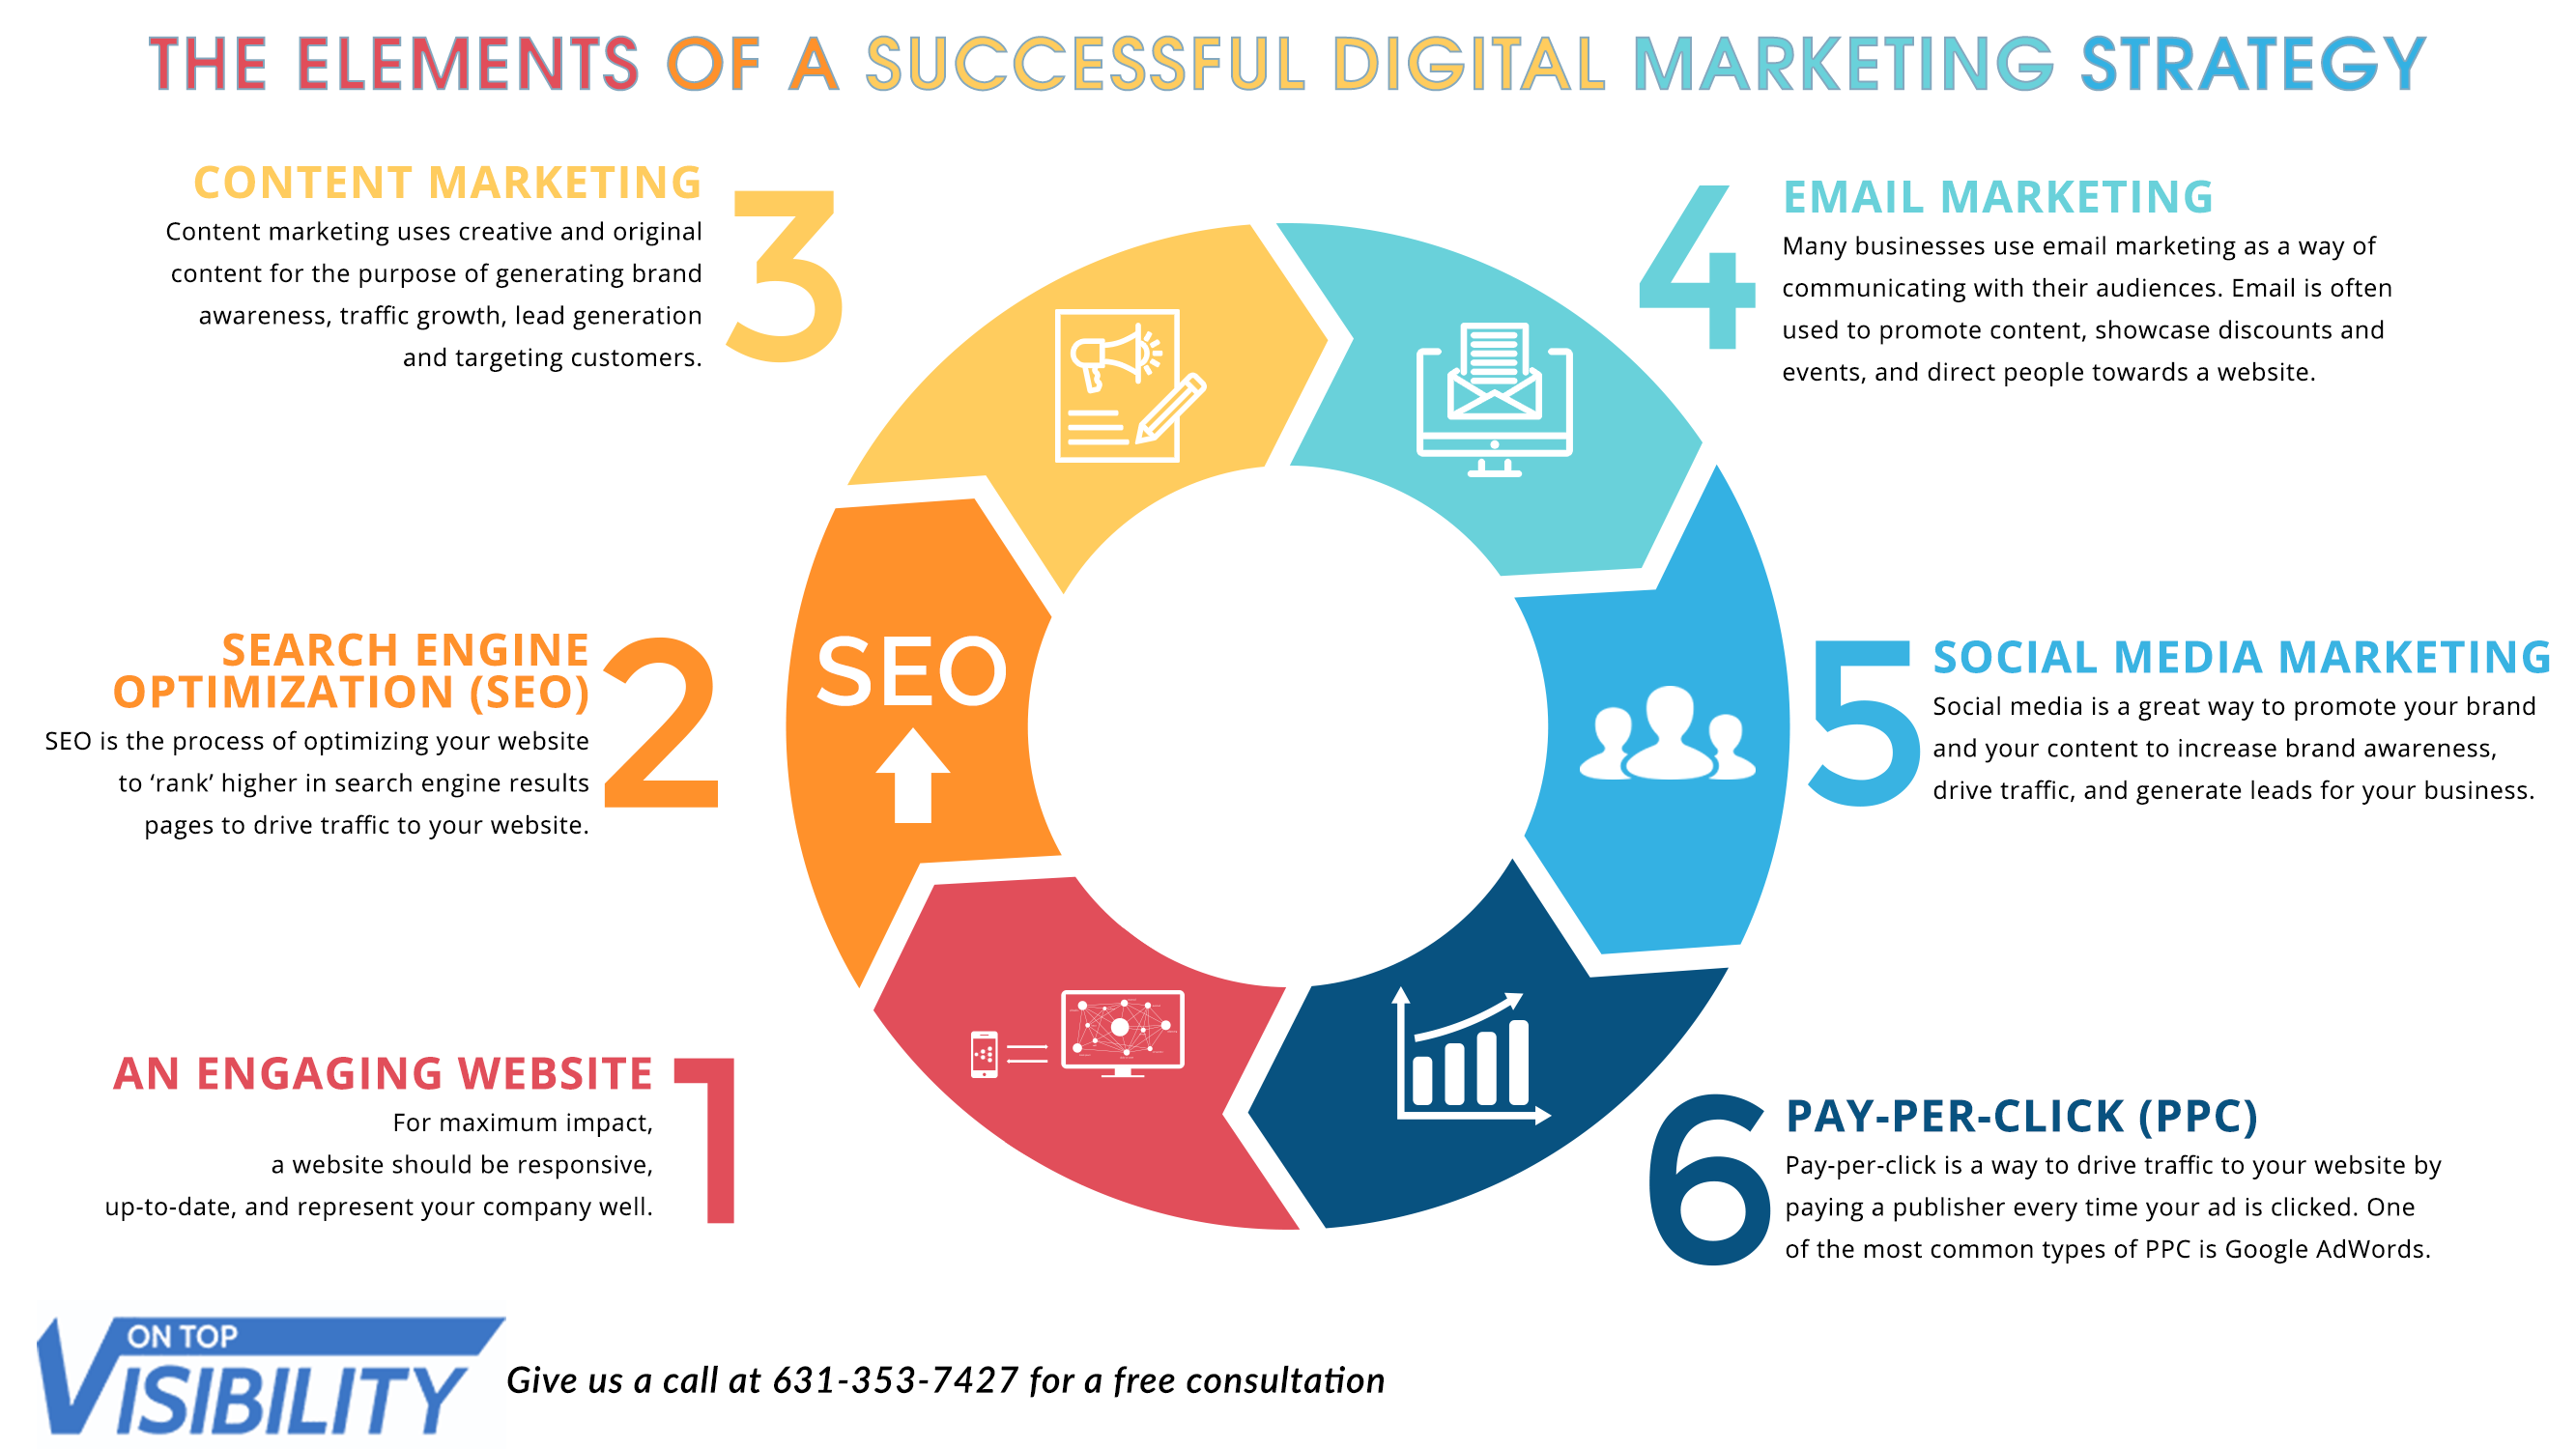  A graphic showing the elements of a successful digital marketing strategy, including content marketing, search engine optimization, an engaging website, email marketing, social media, and pay-per-click advertising.